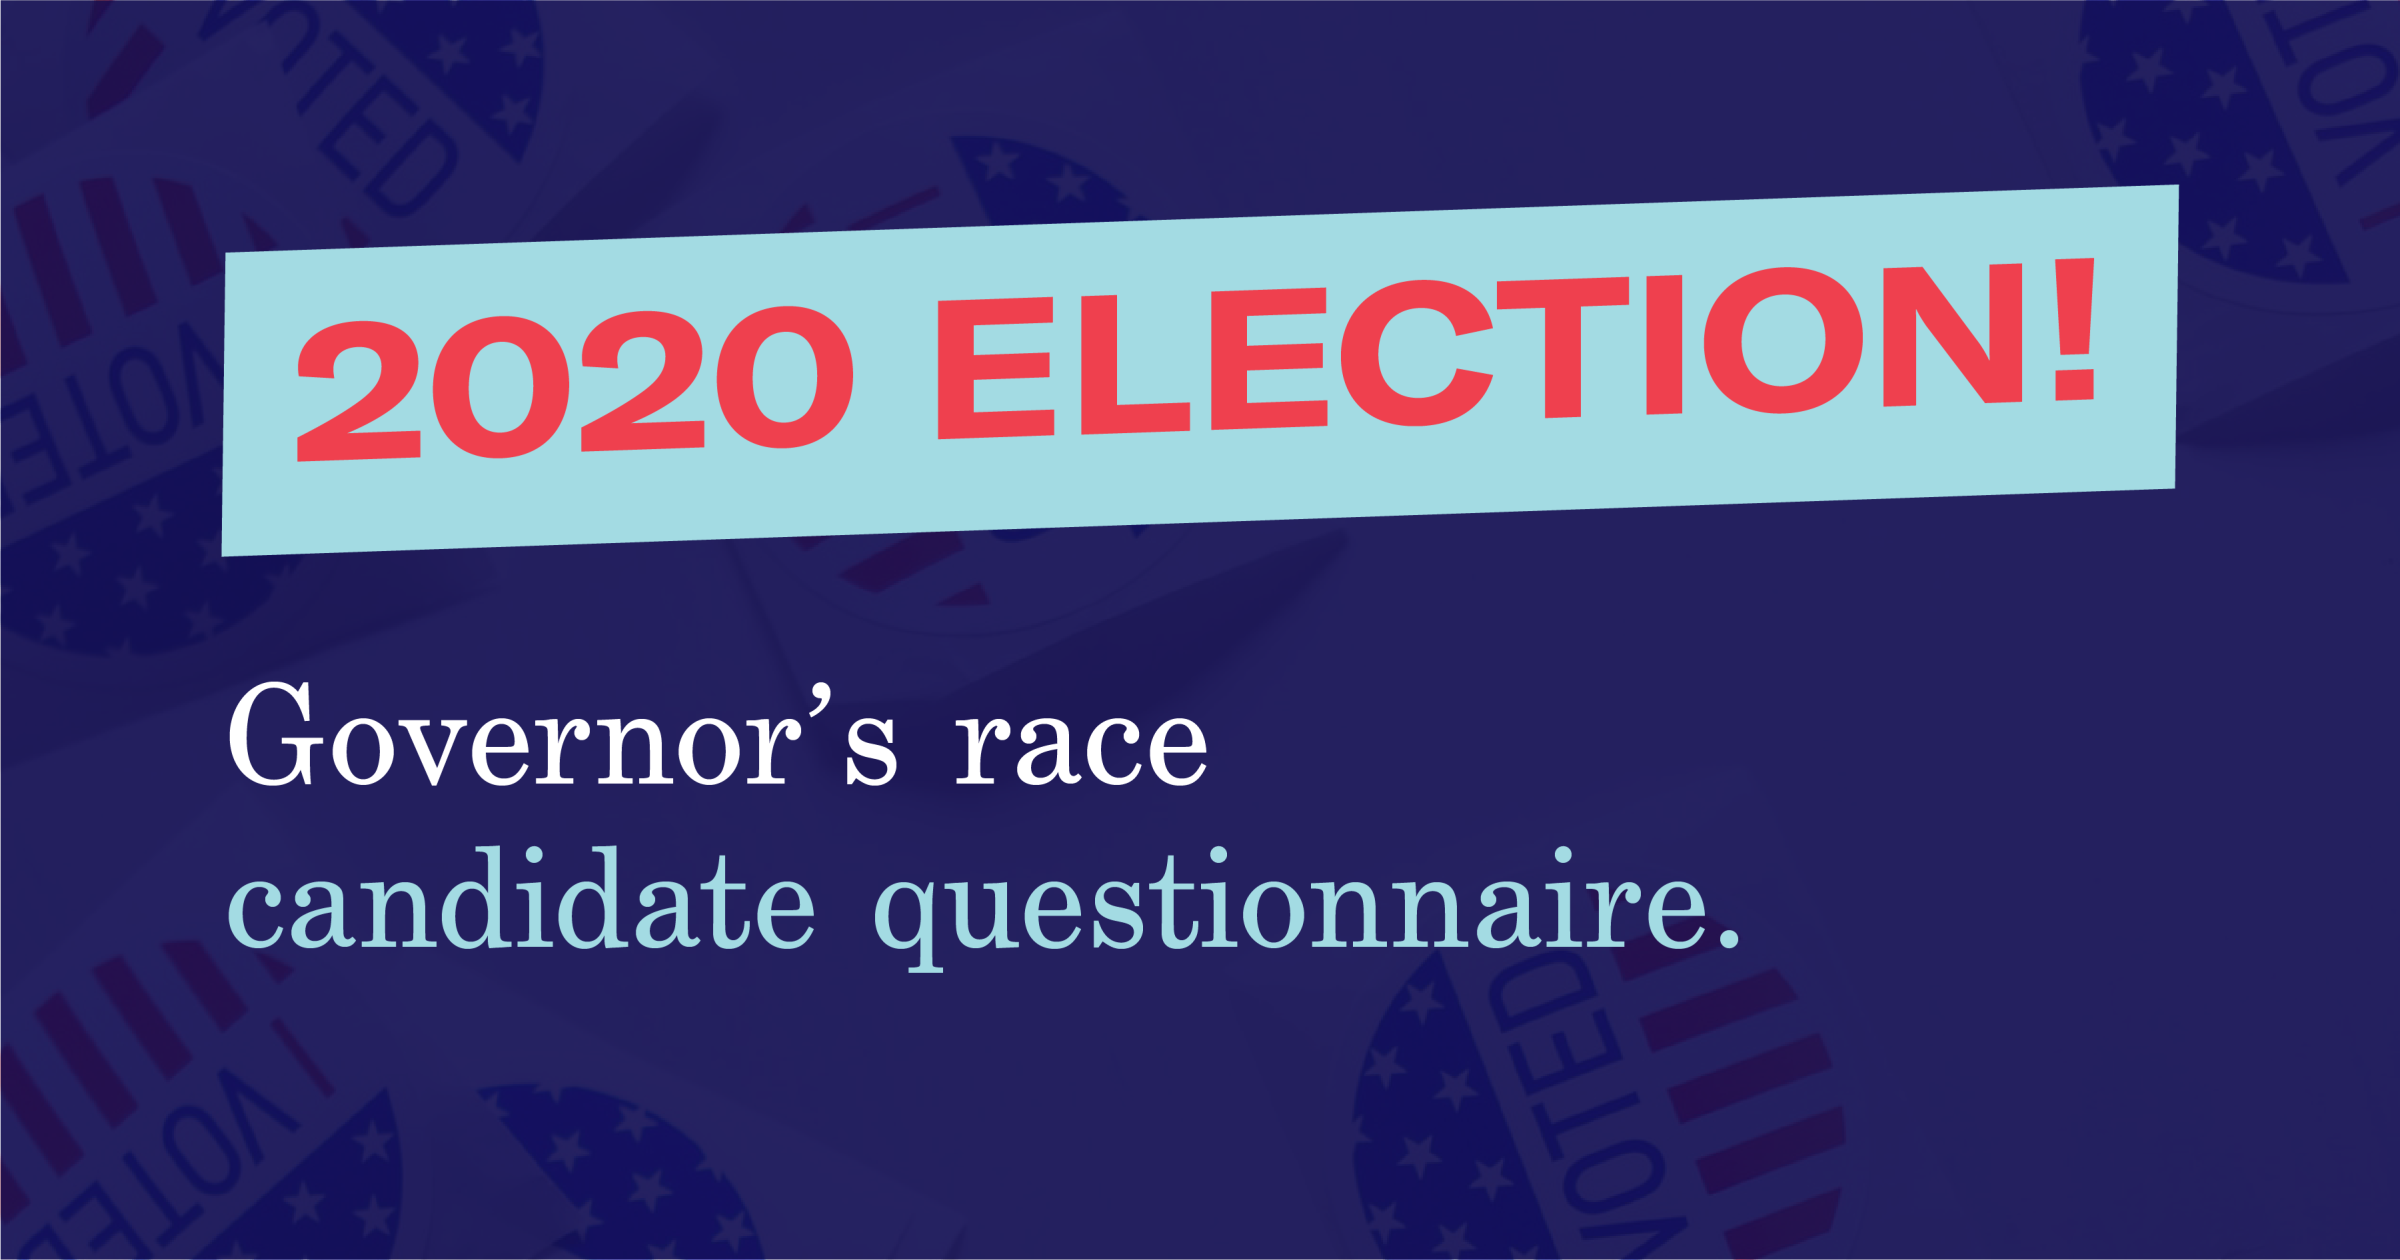 Graphic of 2020 Election Governor's race candidate questionnaire.